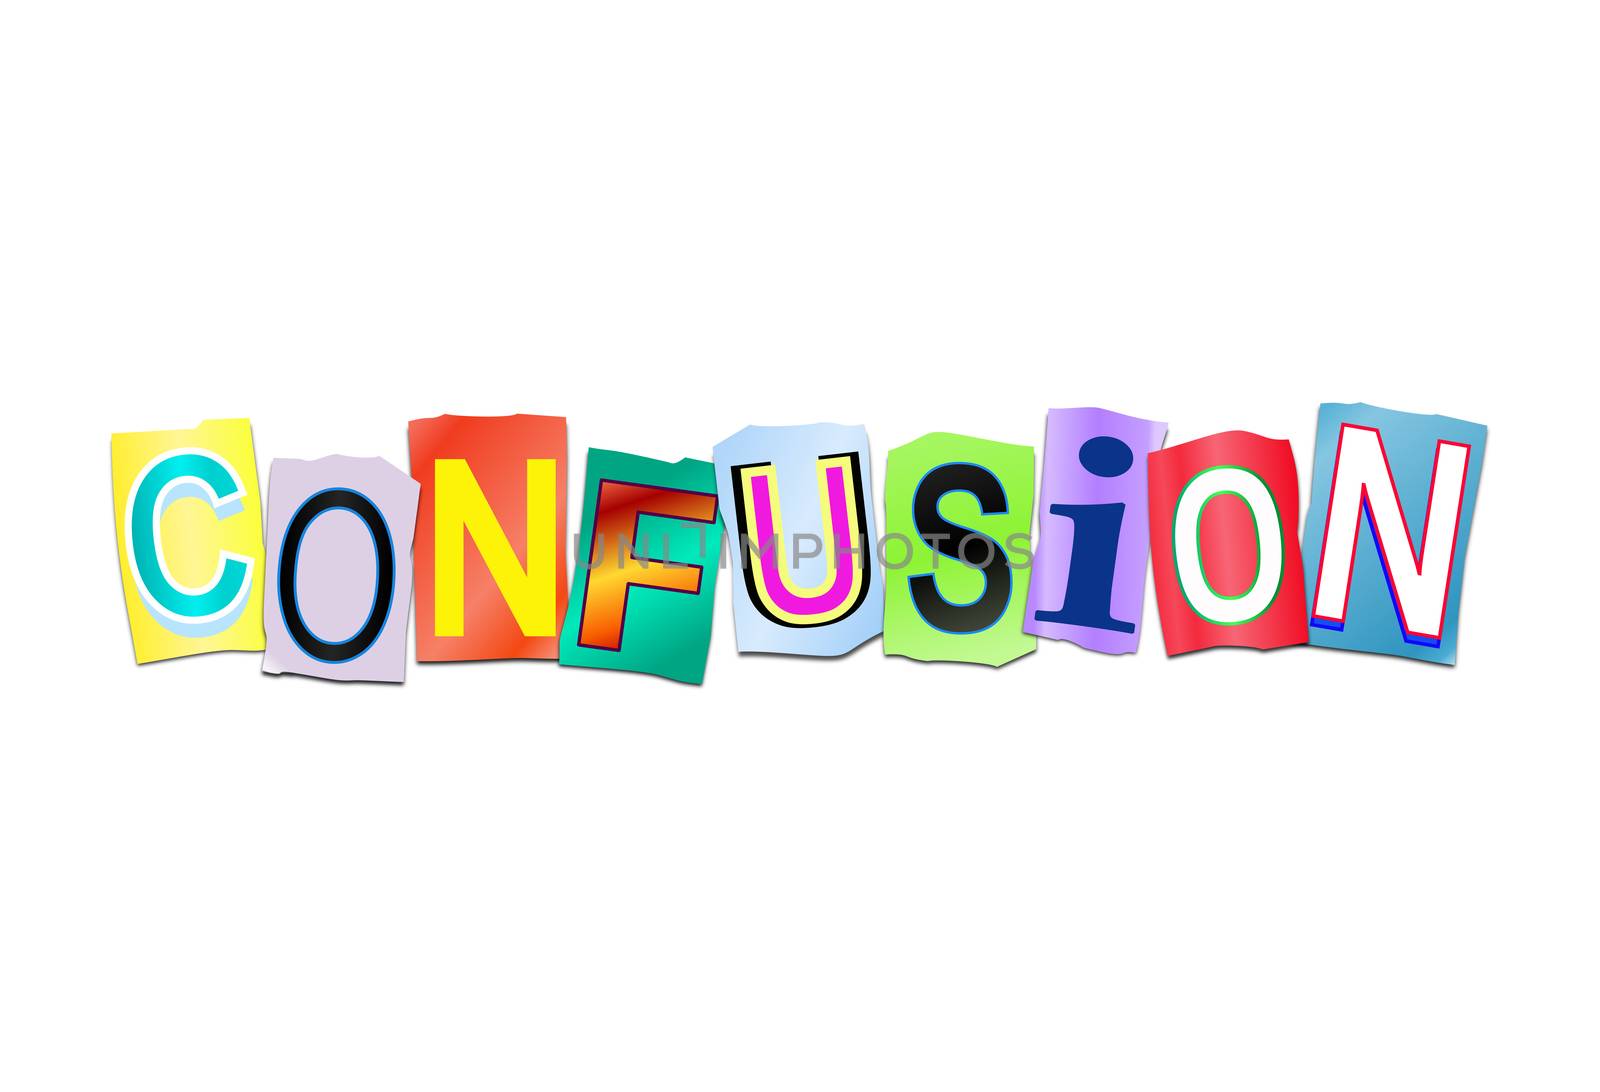 Illustration depicting a set of cut out printed letters arranged to form the word confusion.